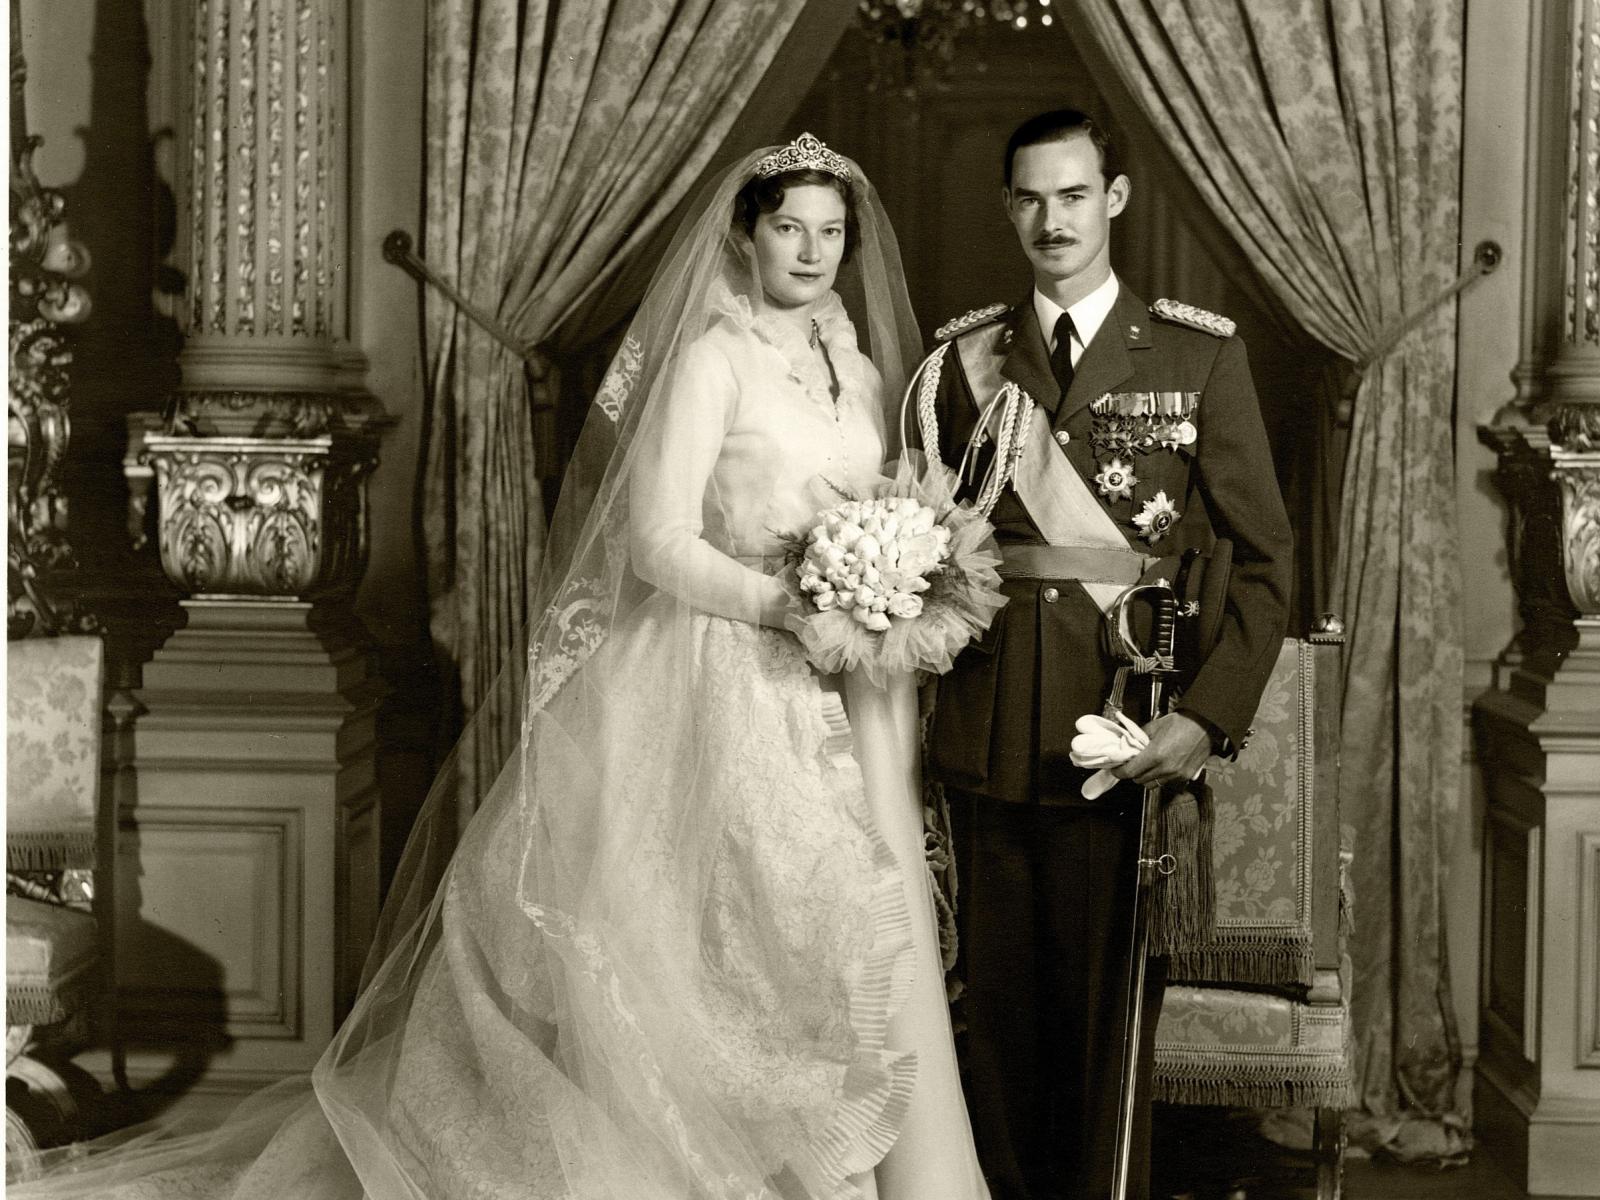 Princely Wedding: Official picture of Prince Jean and Princess Josephine-Charlotte